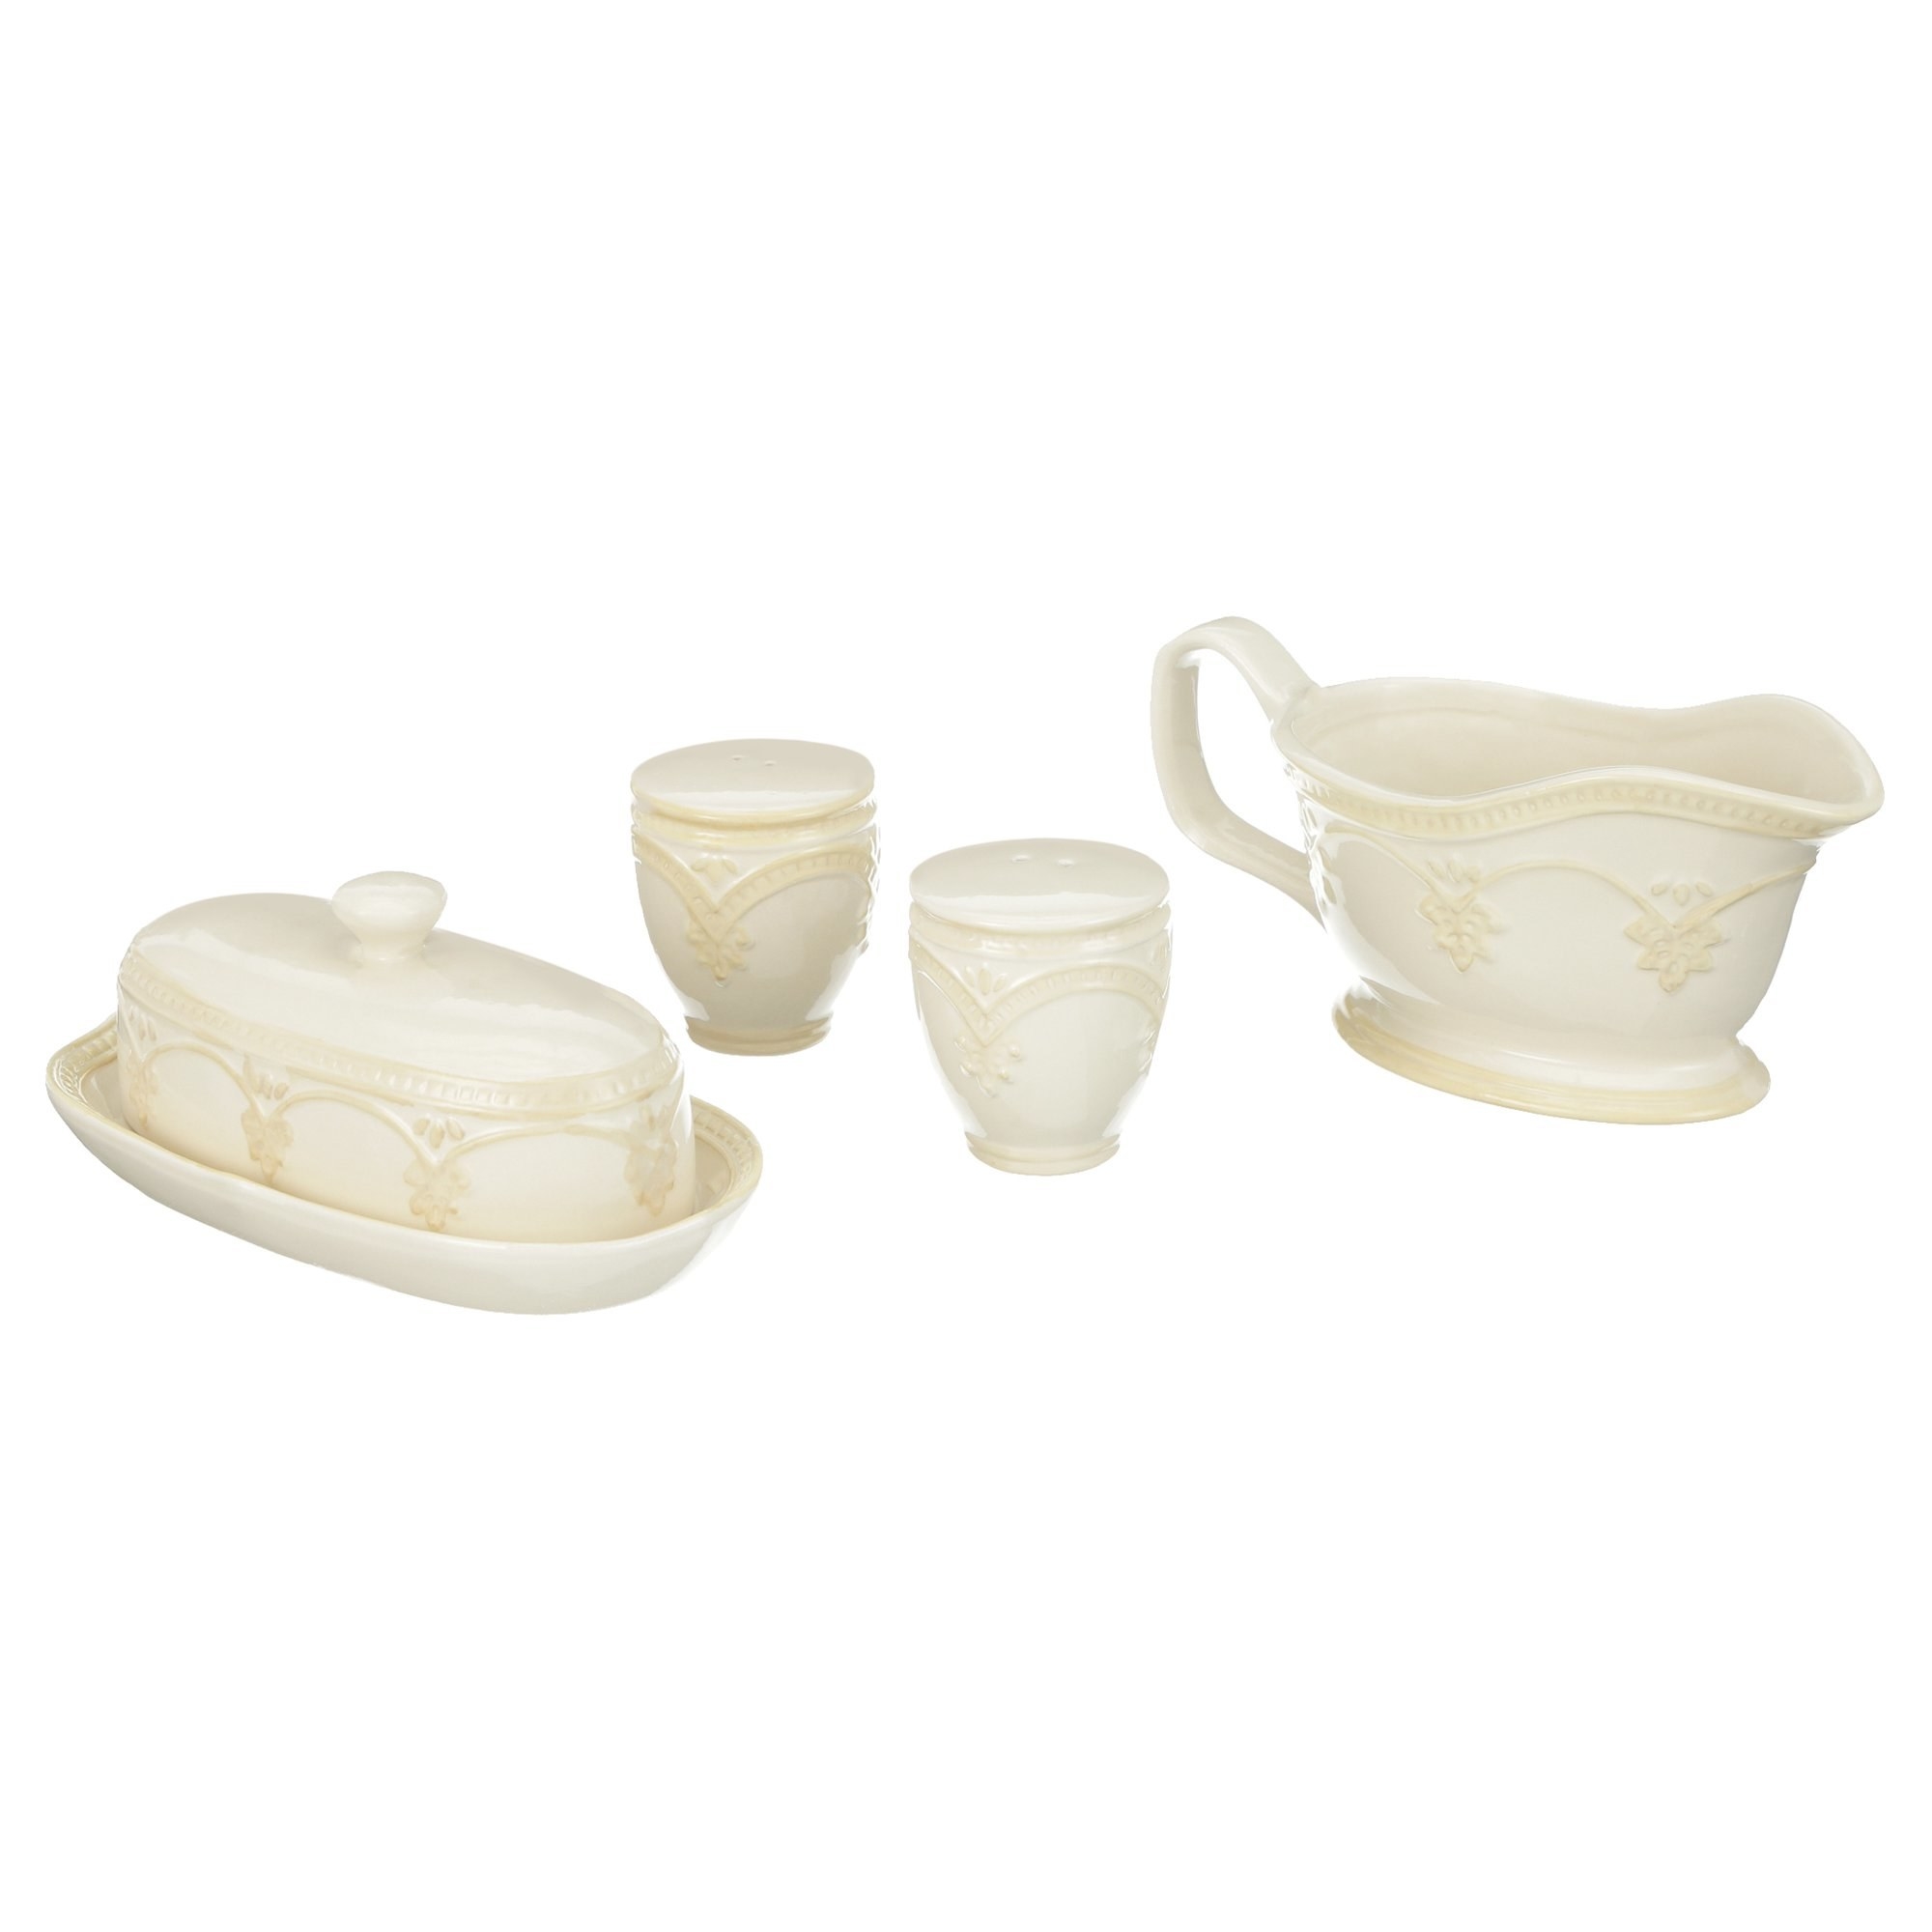 A butter dish, gravy boat, and salt and pepper shakers with elegant embossed details